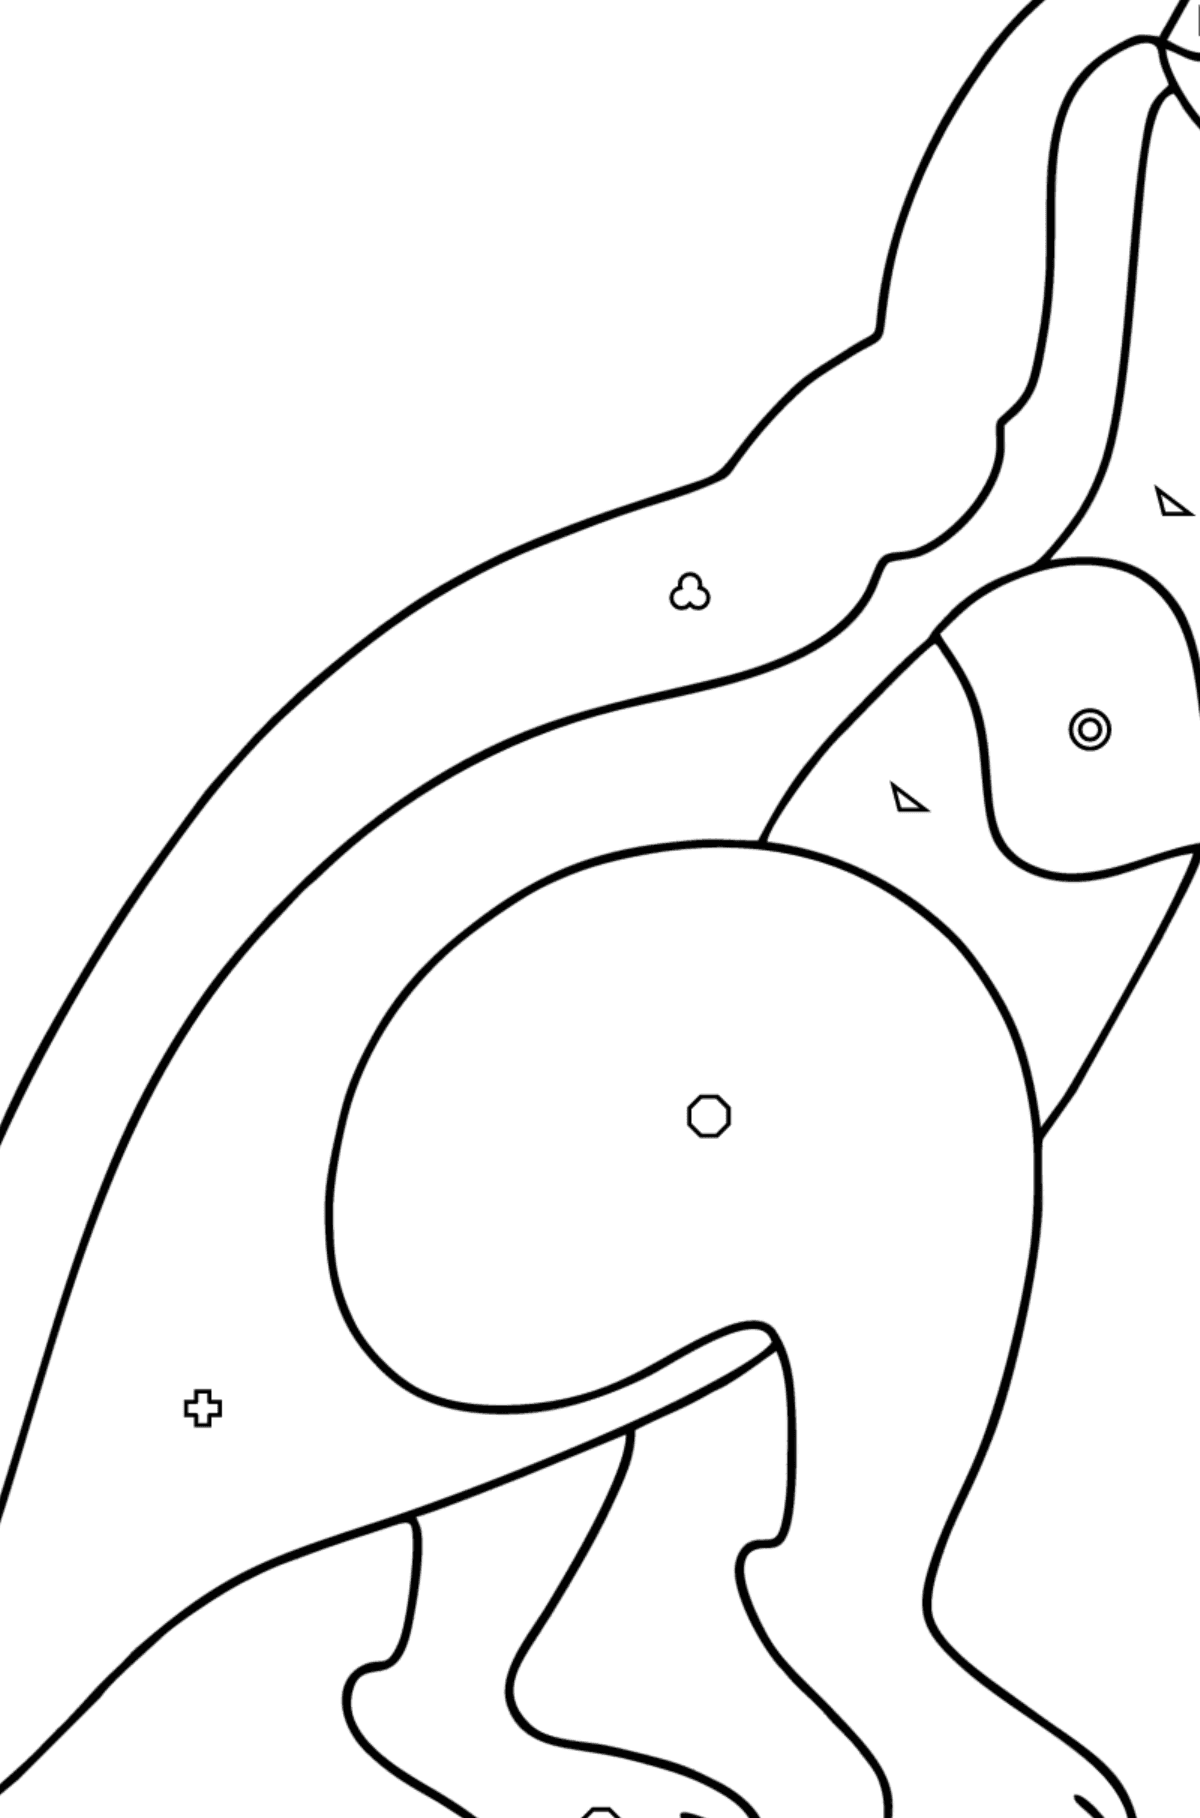 Agilisaurus coloring page - Coloring by Geometric Shapes for Kids